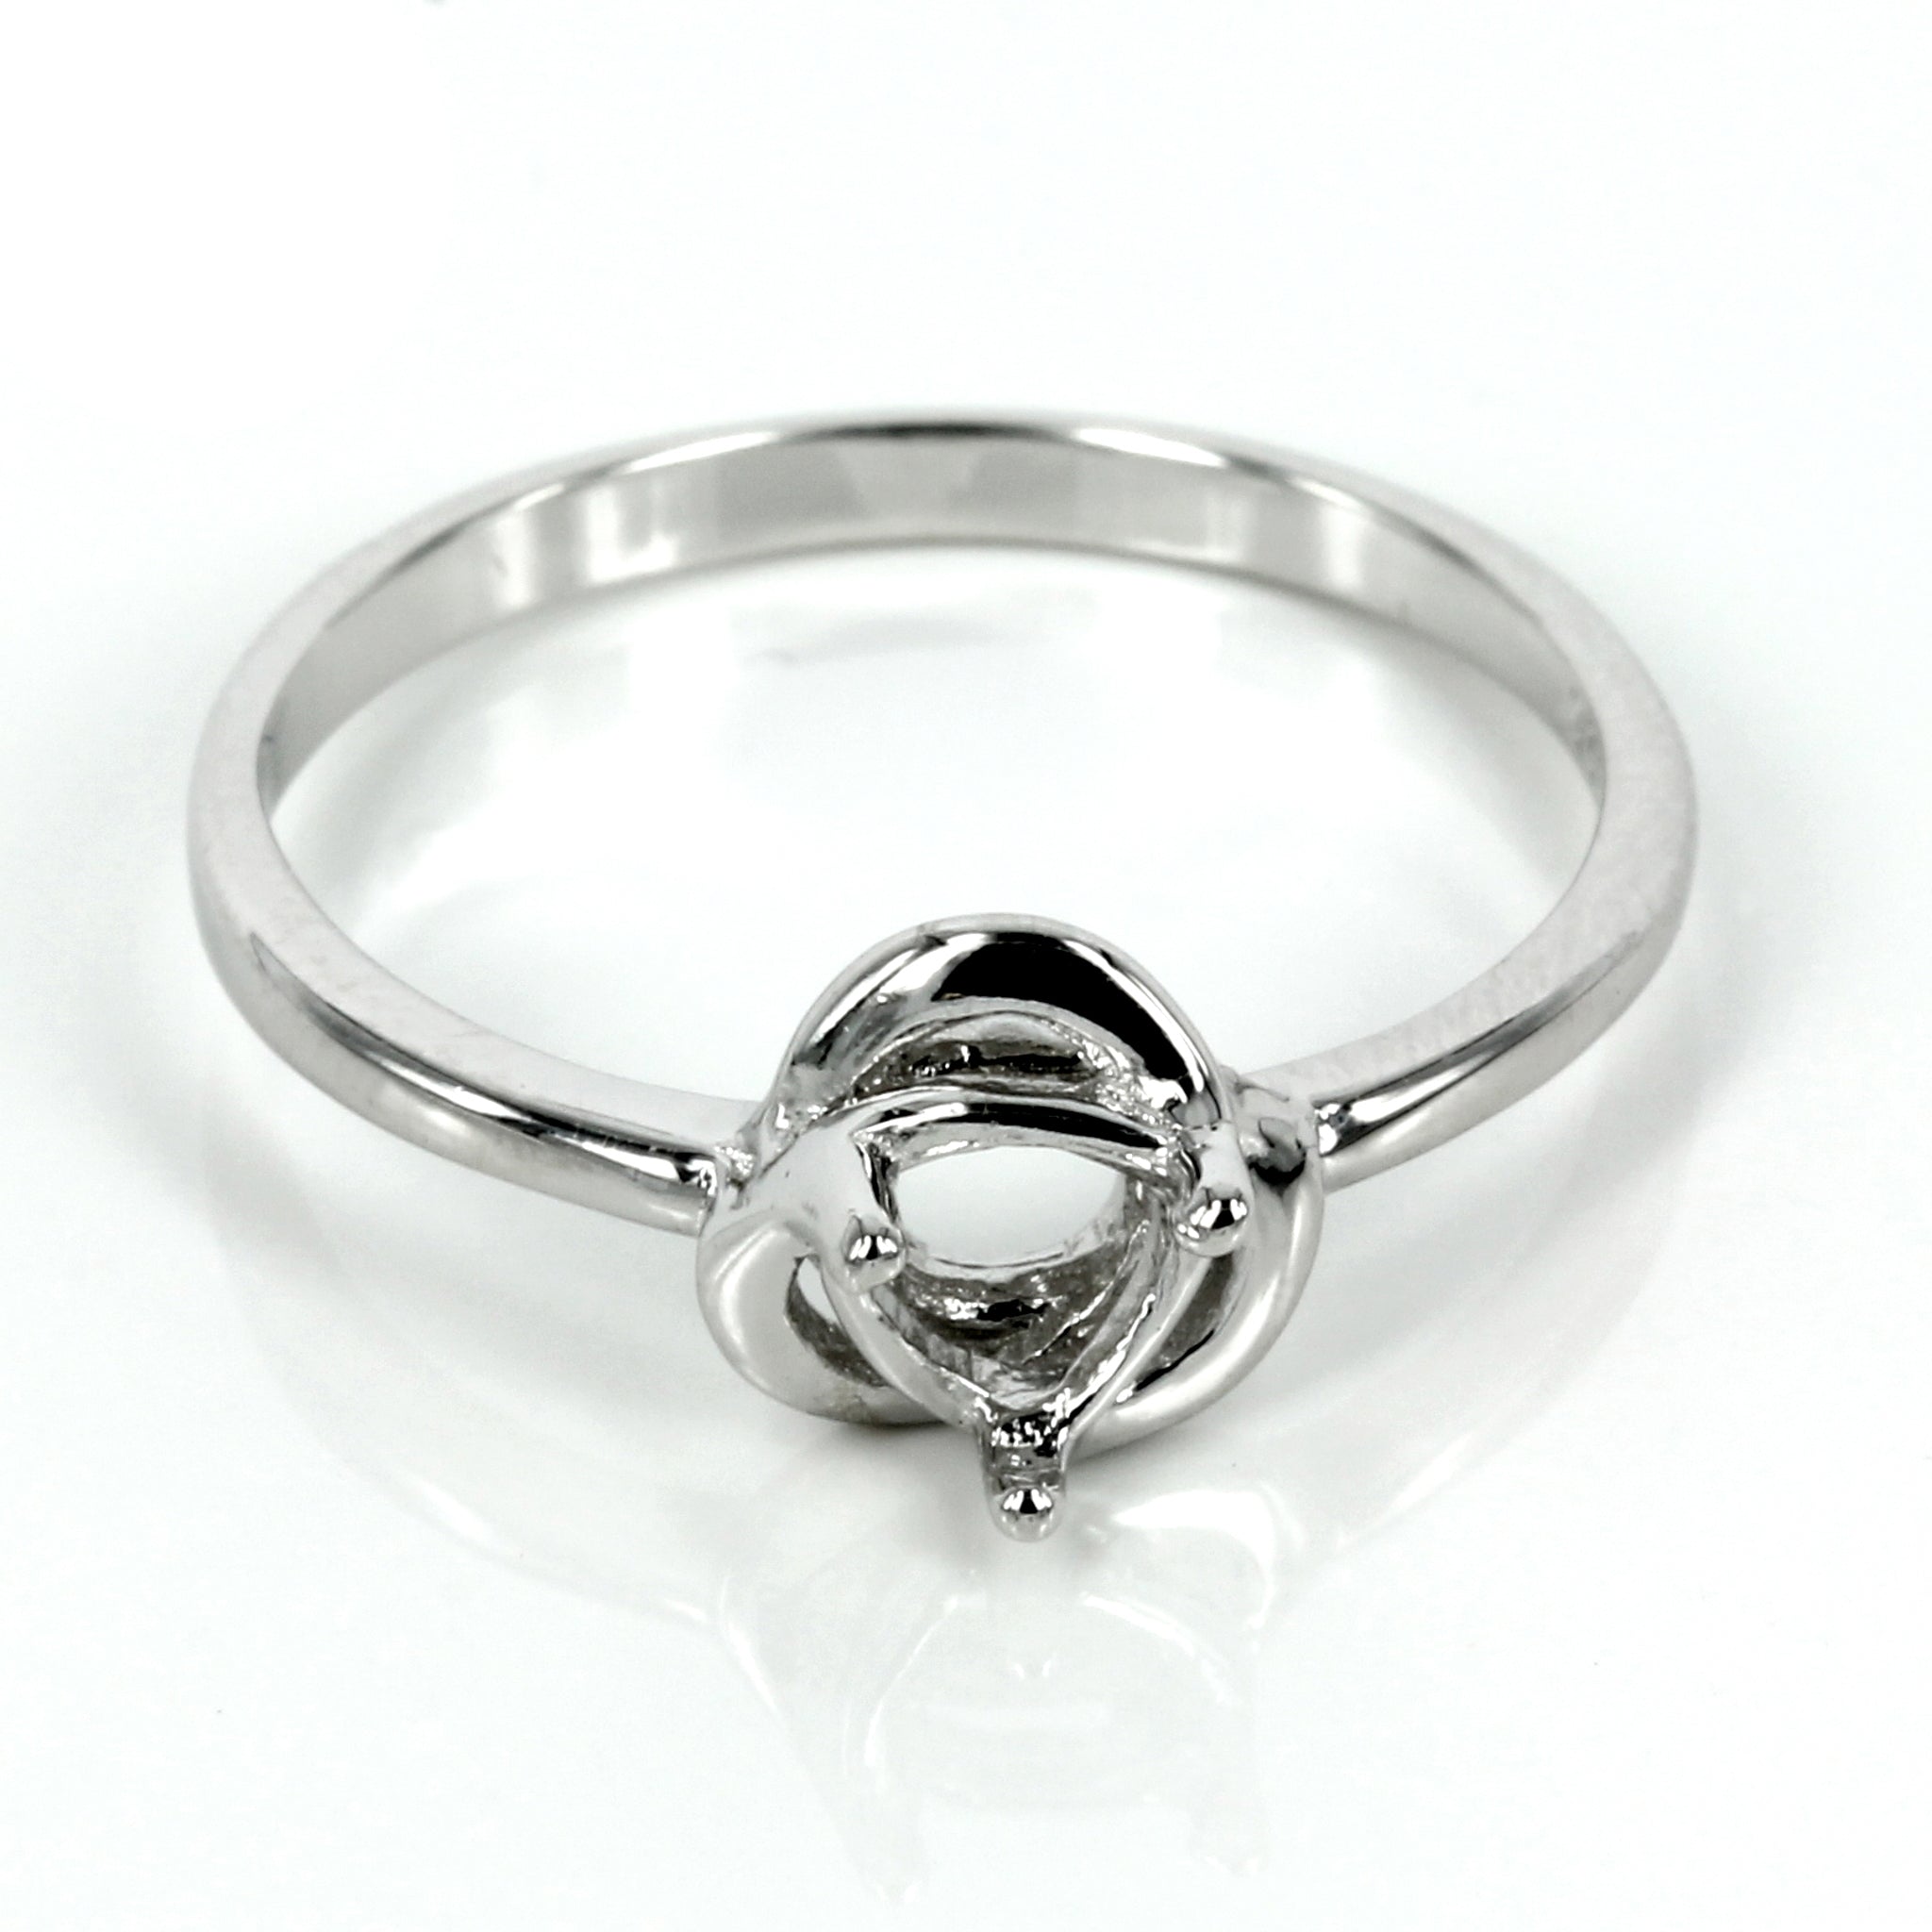 Celtic triad inspired ring with trillion setting in sterling silver 5mm